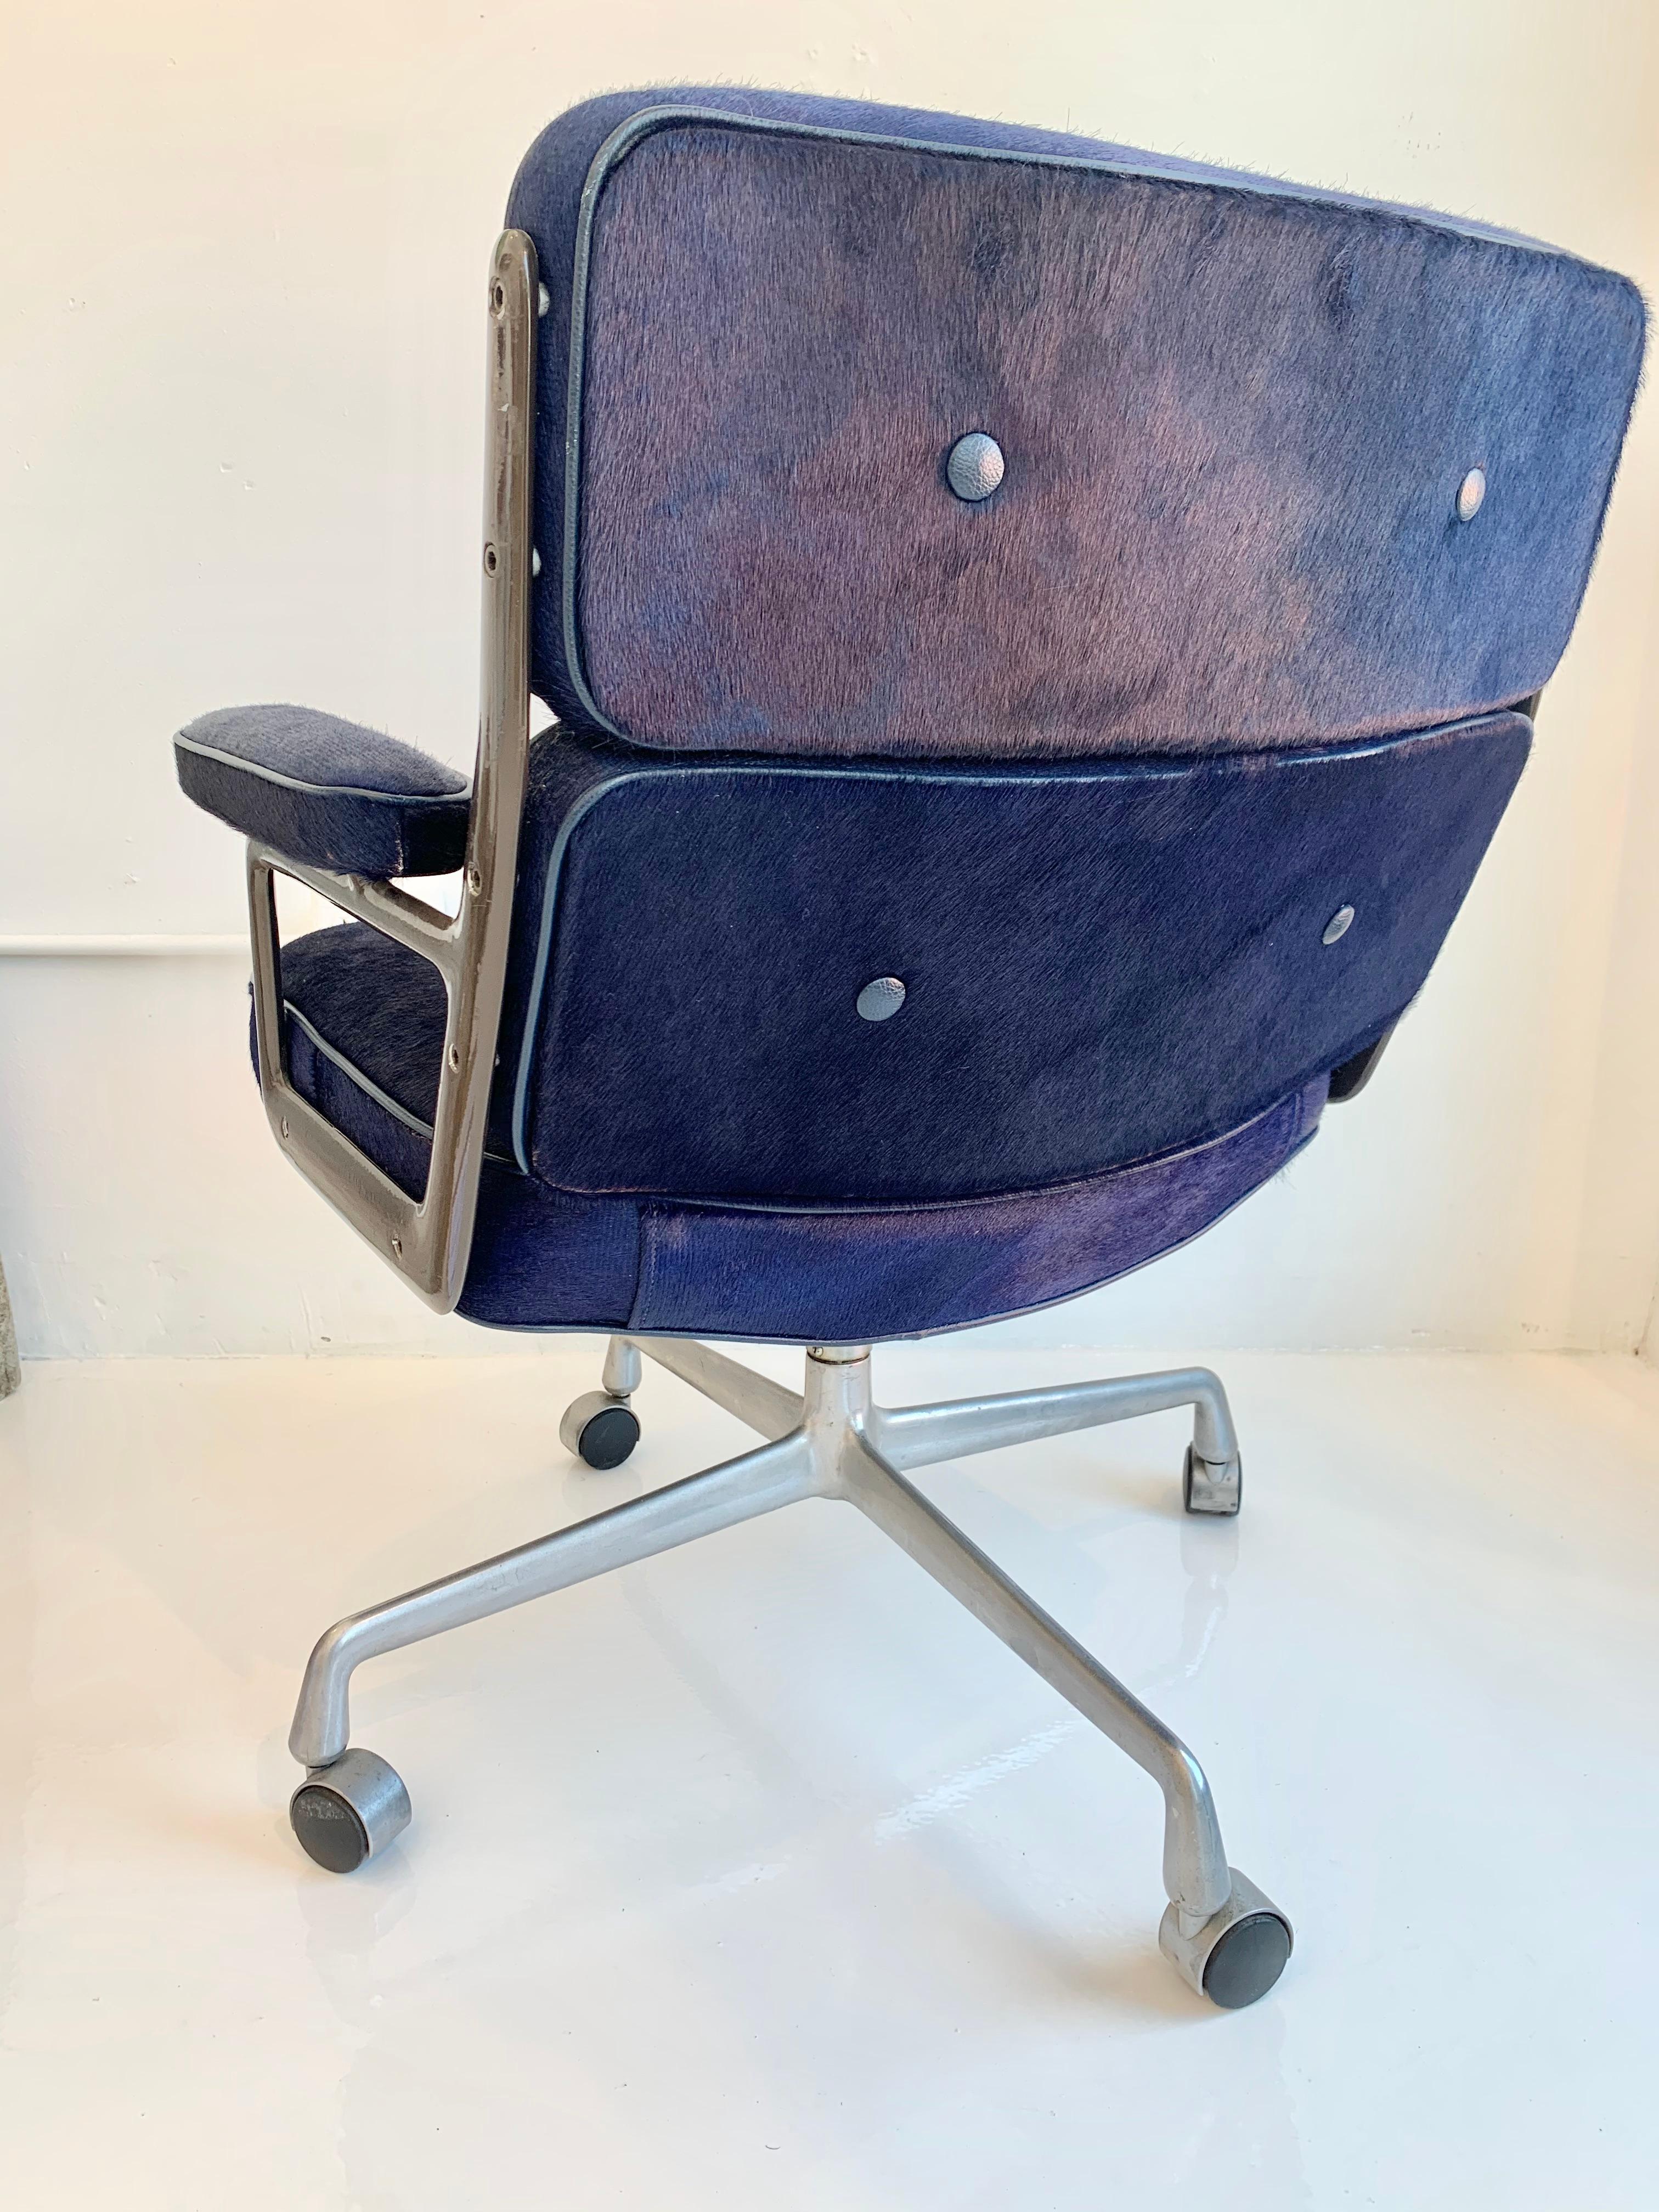 Vintage Eames time life swivel chair in blue horse hair and leather buttons. Nickel frame powder-coated in black. Nickel base. Swivels and reclines. Good vintage condition. Some wear as shown. Height adjustable with tilt back mechanism. Offered with